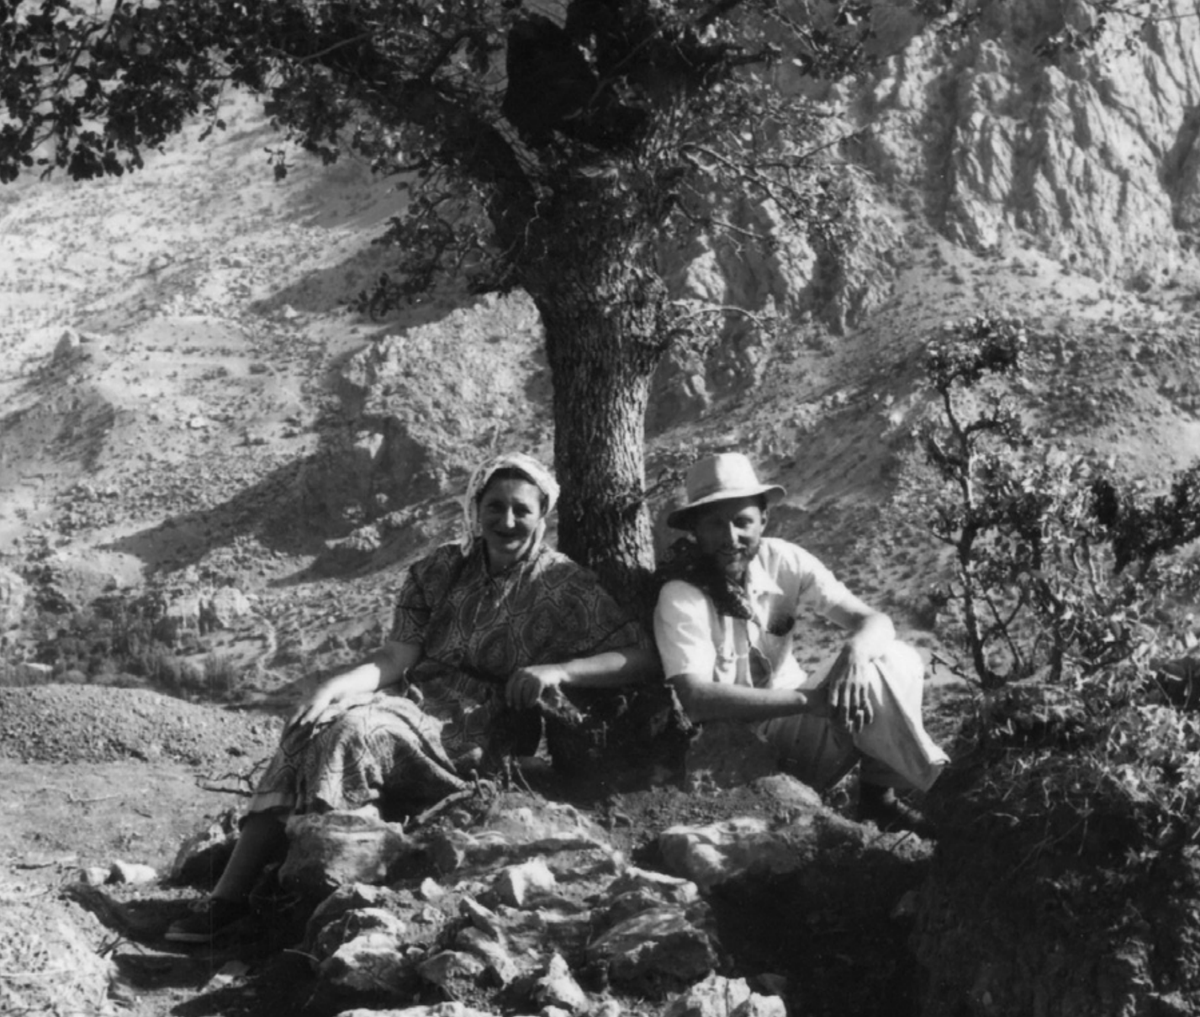 By 1951, Goell raised funds, obtained permits & hired workers to excavate the site. German epigrapher Friedrich Karl Dörner also obtained permits, forcing the two to collaborate together at Nemrud Dağ.Over the years, they uncovered colossal monuments and Hellenistic sculpture.